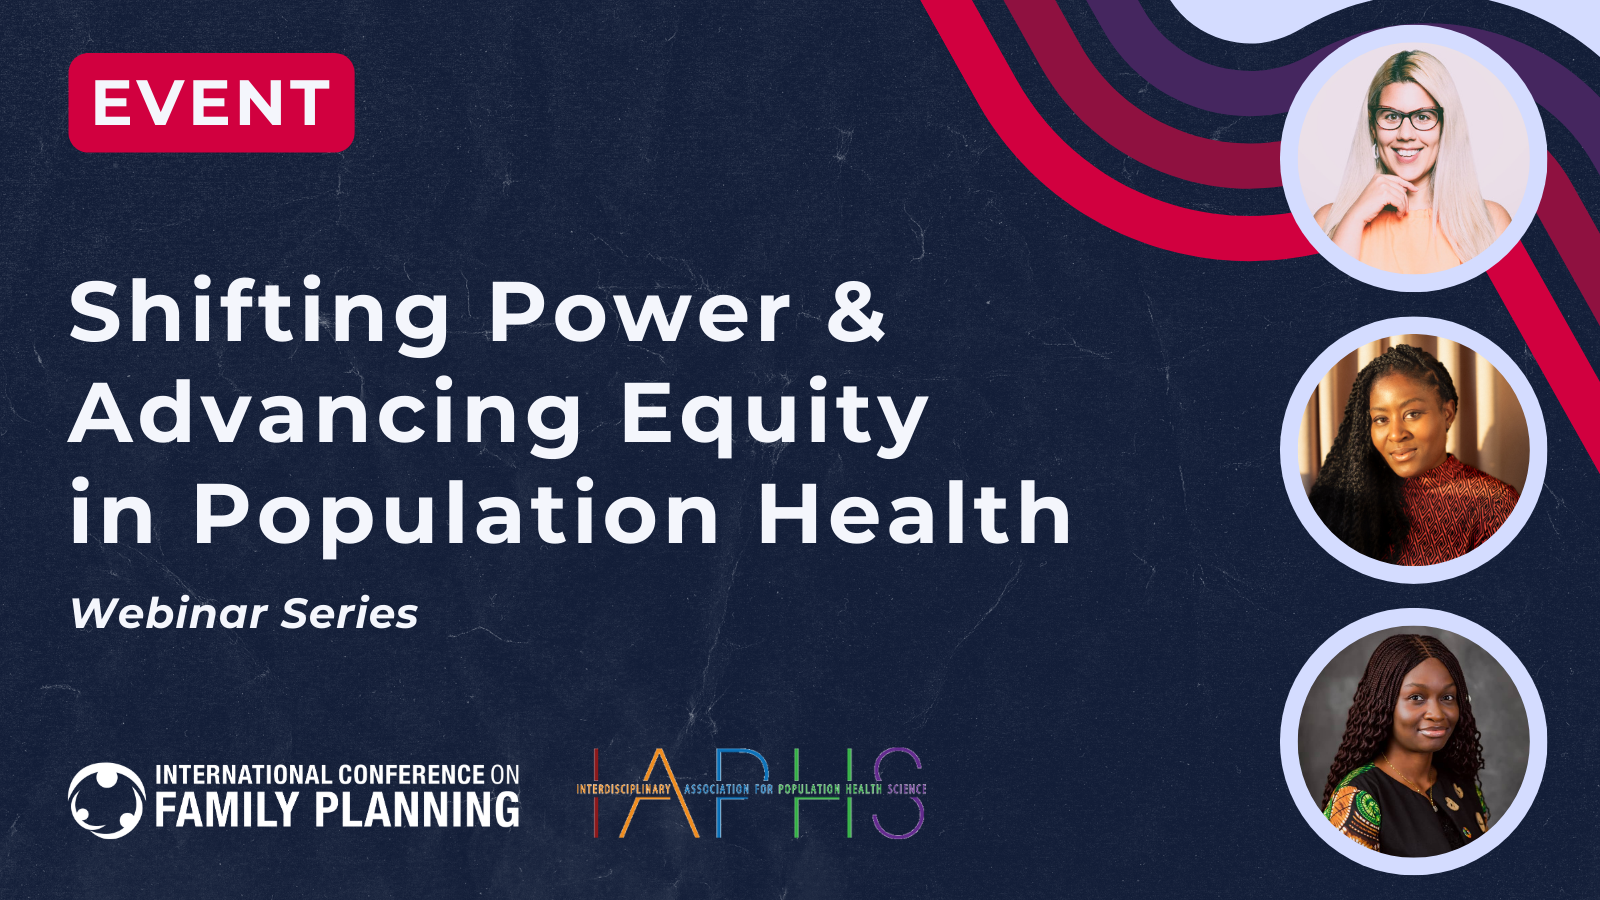 WATCH NOW: Shifting Power and Advancing Equity in Population Health Webinar Series